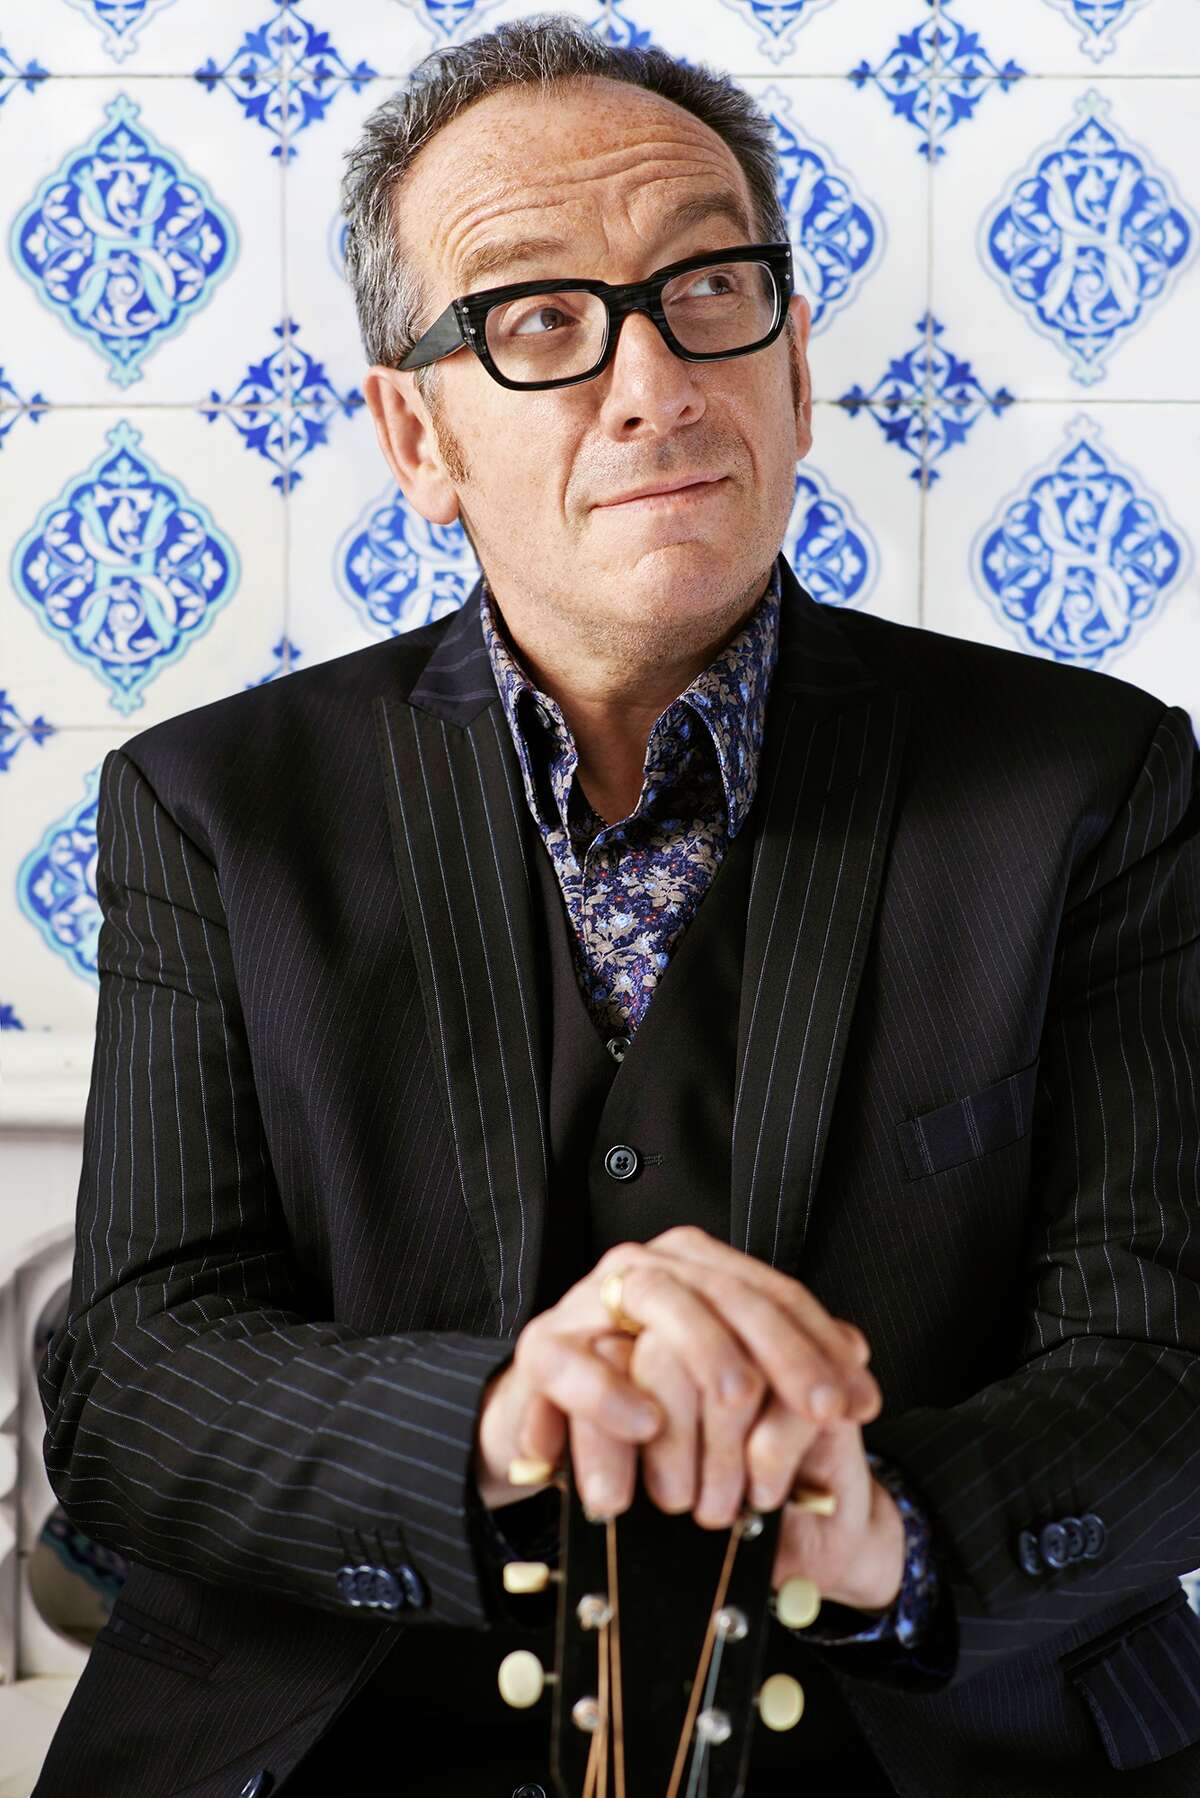 Musician Elvis Costello photographed by James O'Mara